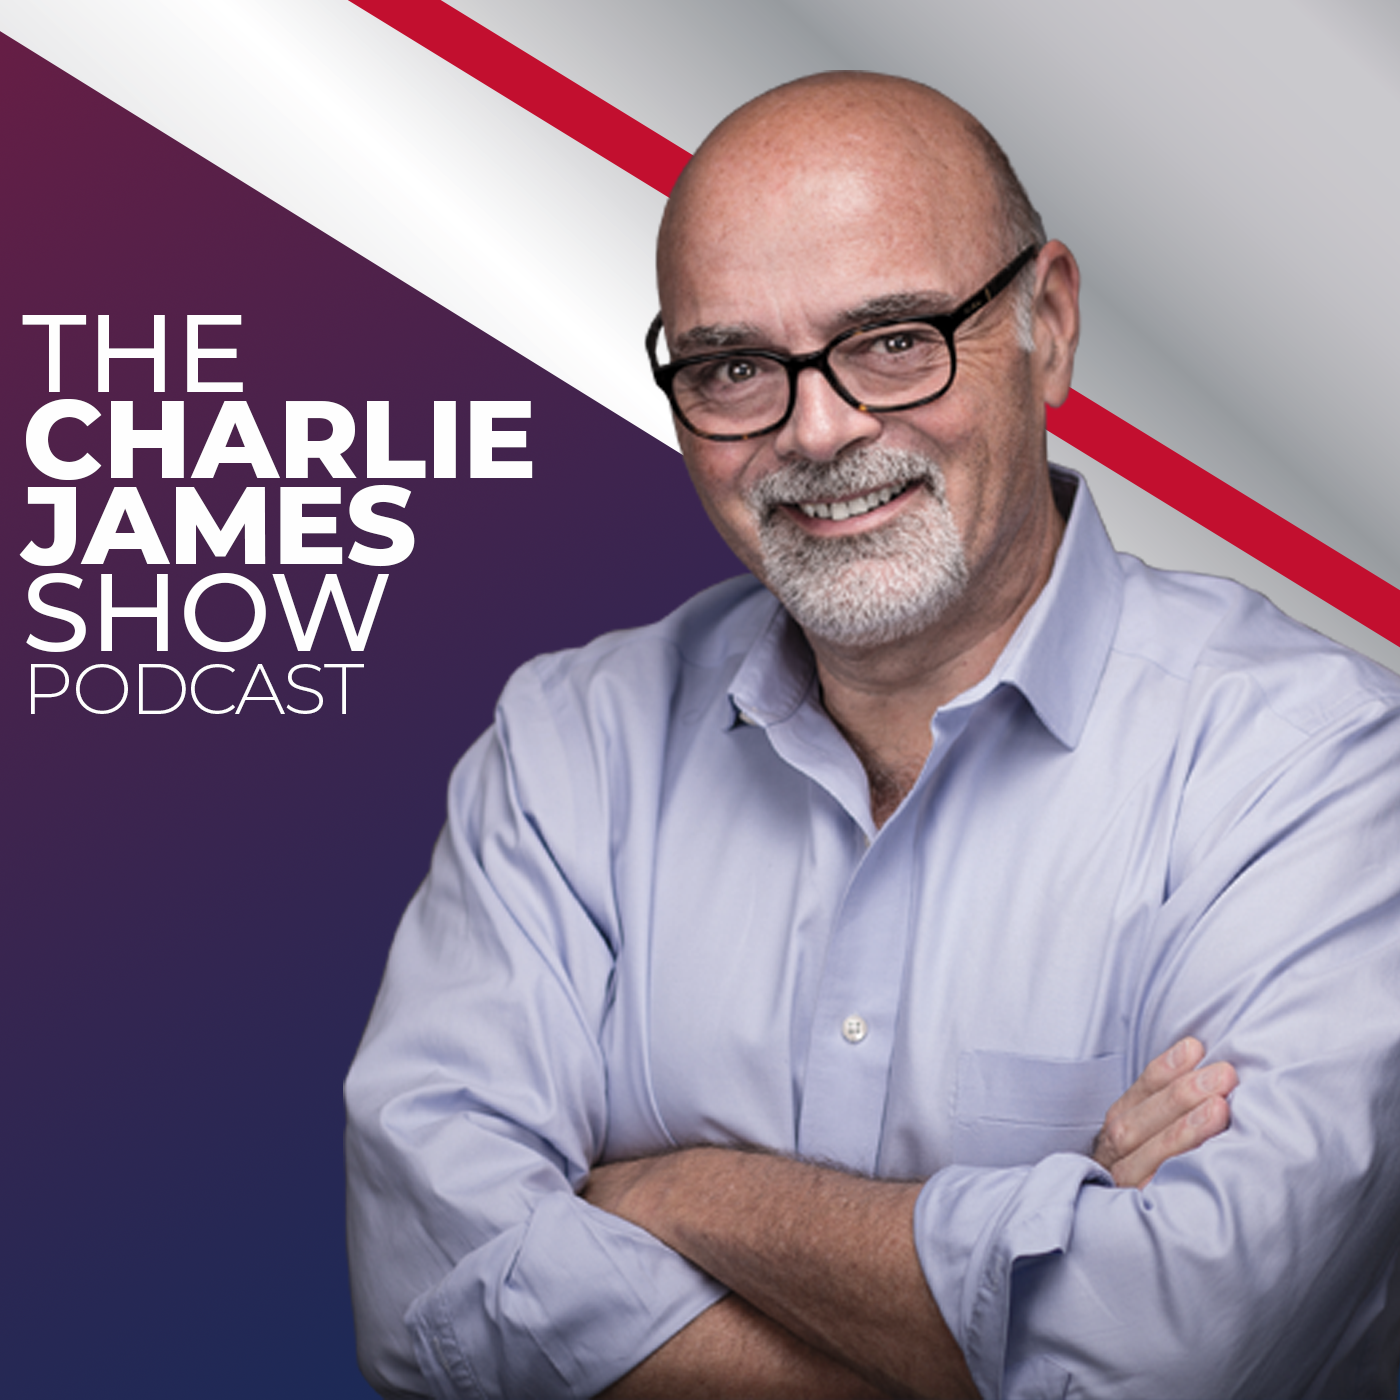 Hour 4 | Travelogues With Odi; Roxy Of Taste Of Britain Reveals The Best Fish And Chips This Side Of The Pond; Odi learns What A Low Country Boil Is; Odi Discovers The Best Fish And Chips In The Upstate | 04-15-24 | The Charlie James Show